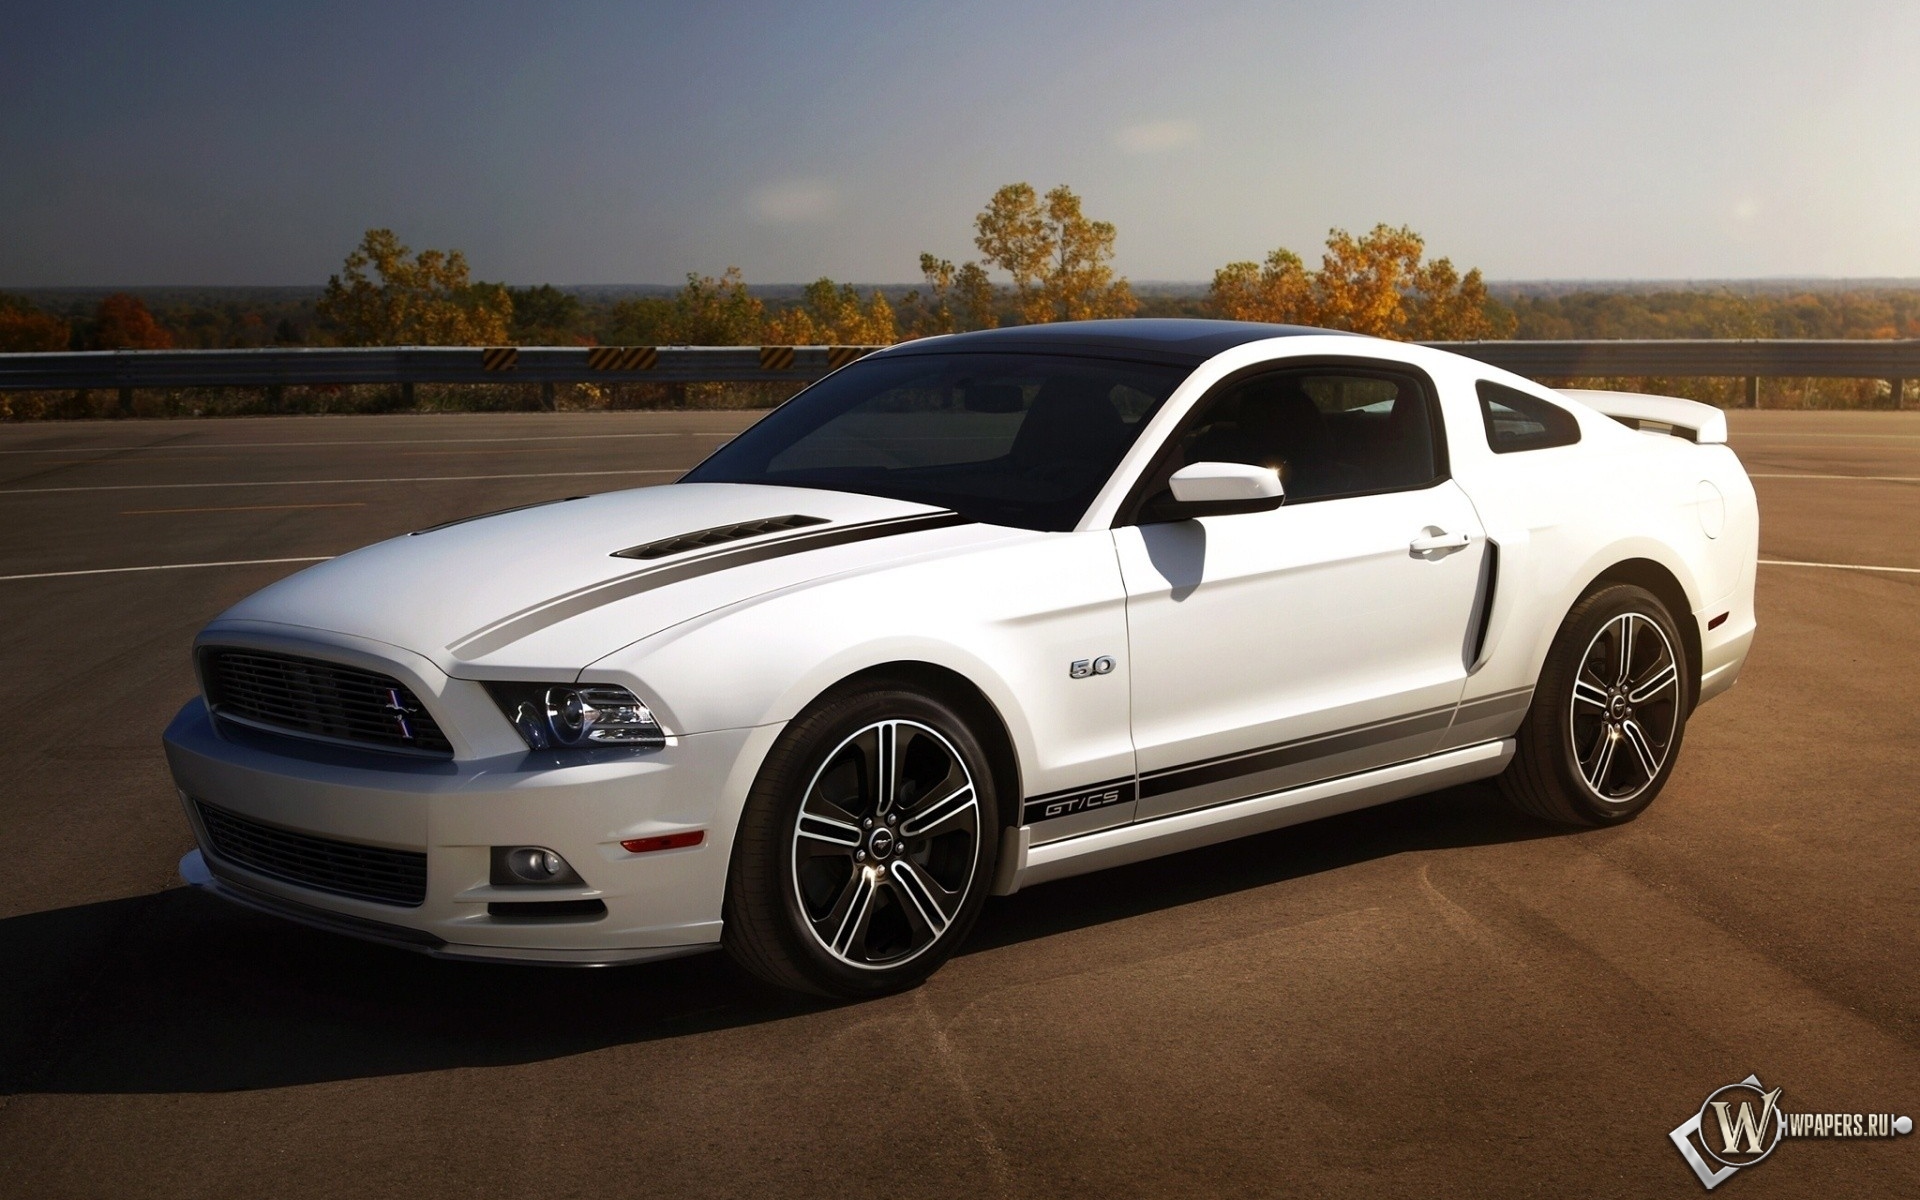 Ford Mustang V8 5.0 1920x1200